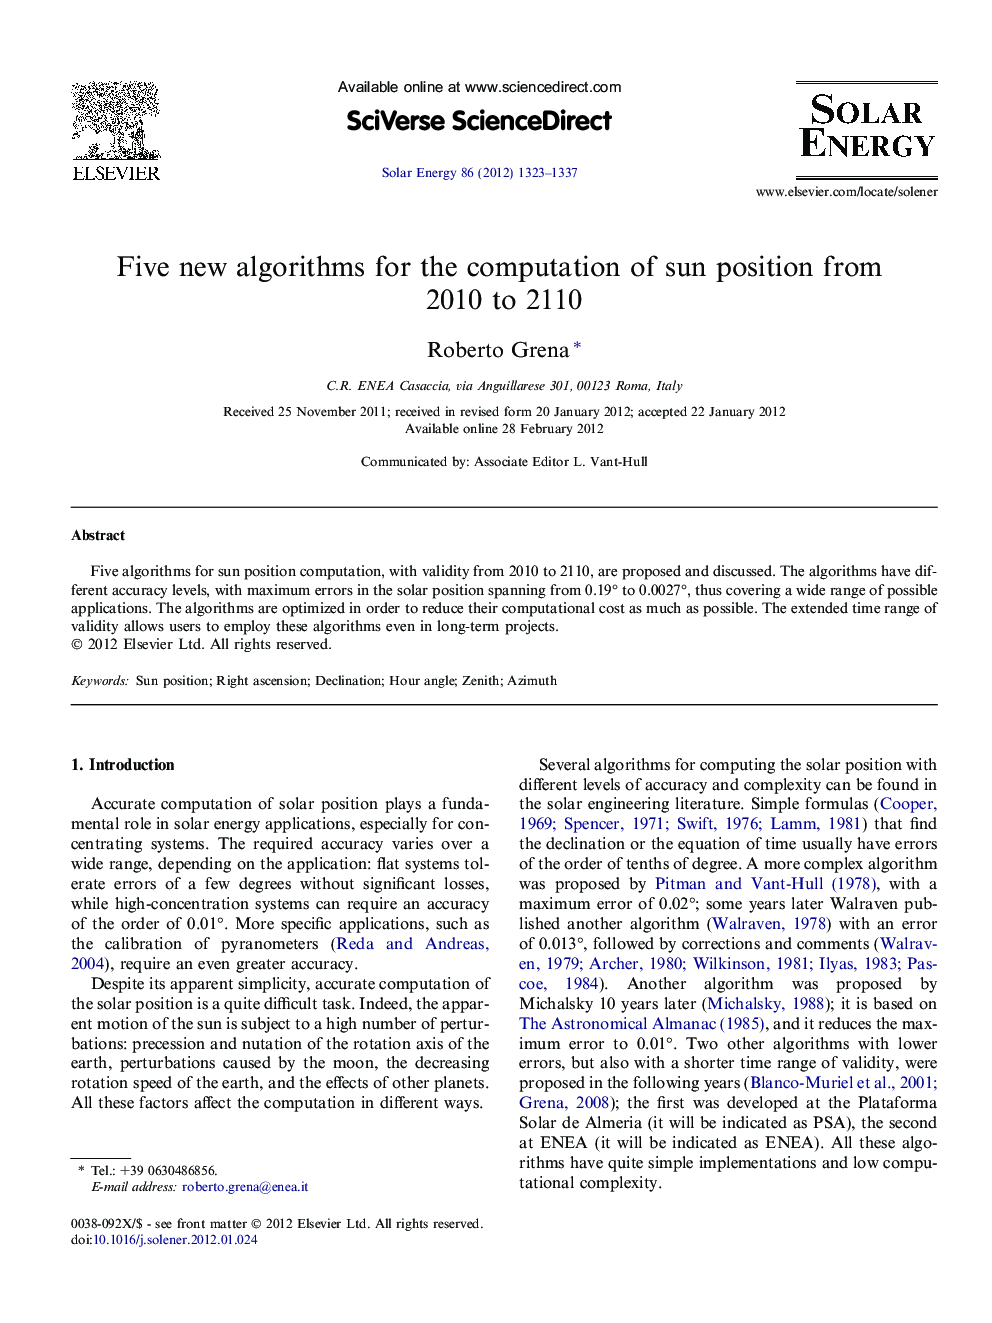 Five new algorithms for the computation of sun position from 2010 to 2110